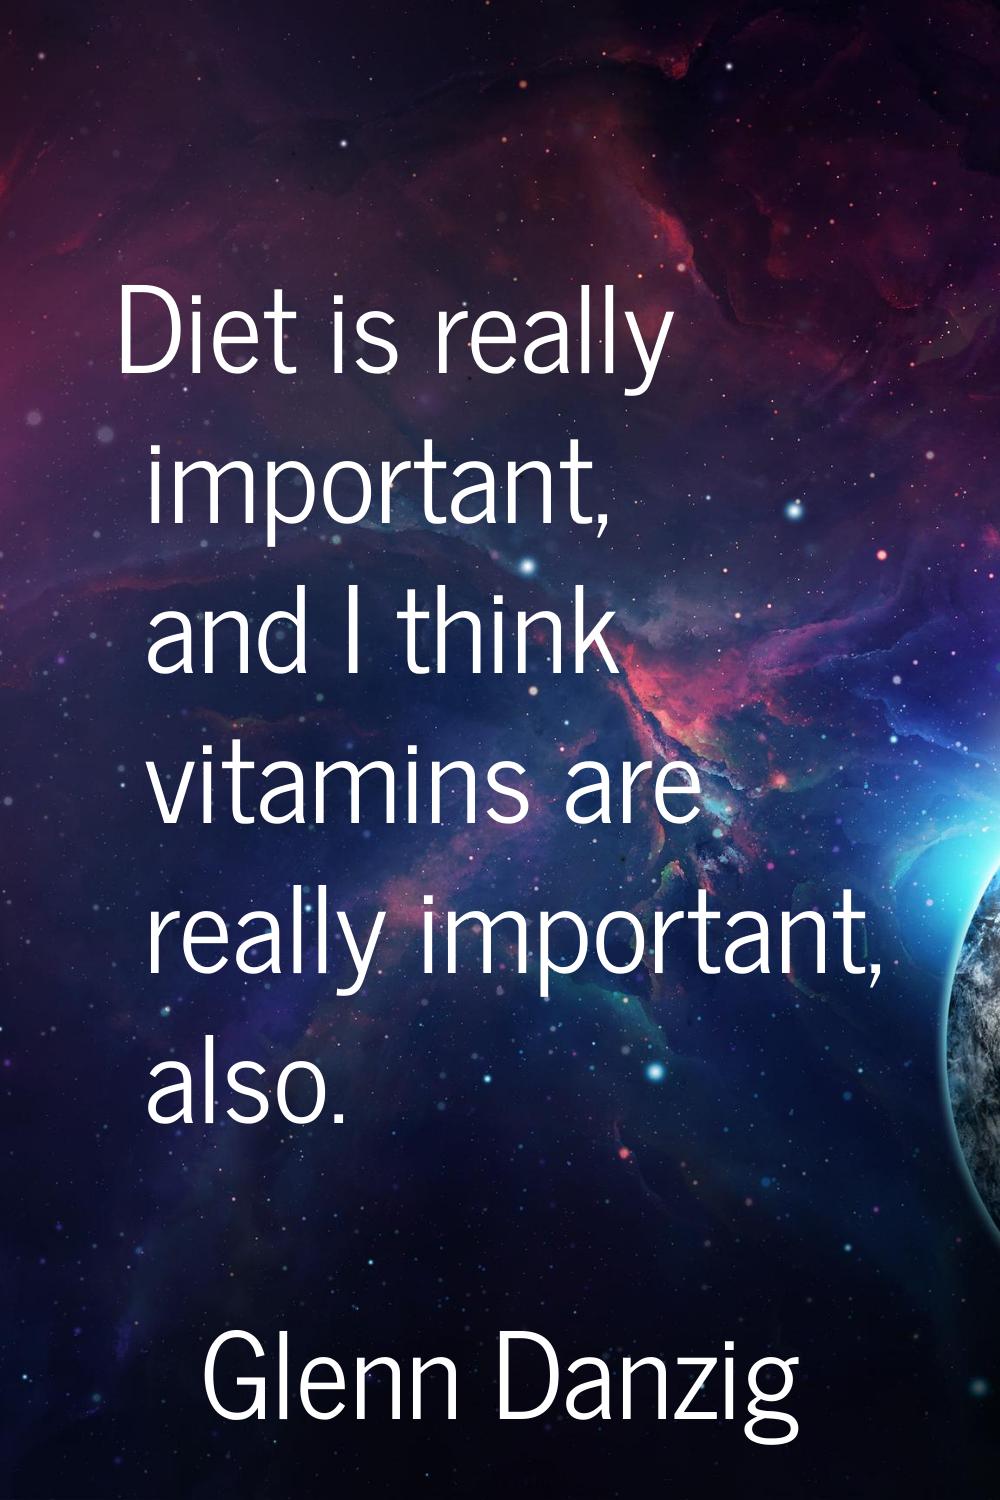 Diet is really important, and I think vitamins are really important, also.